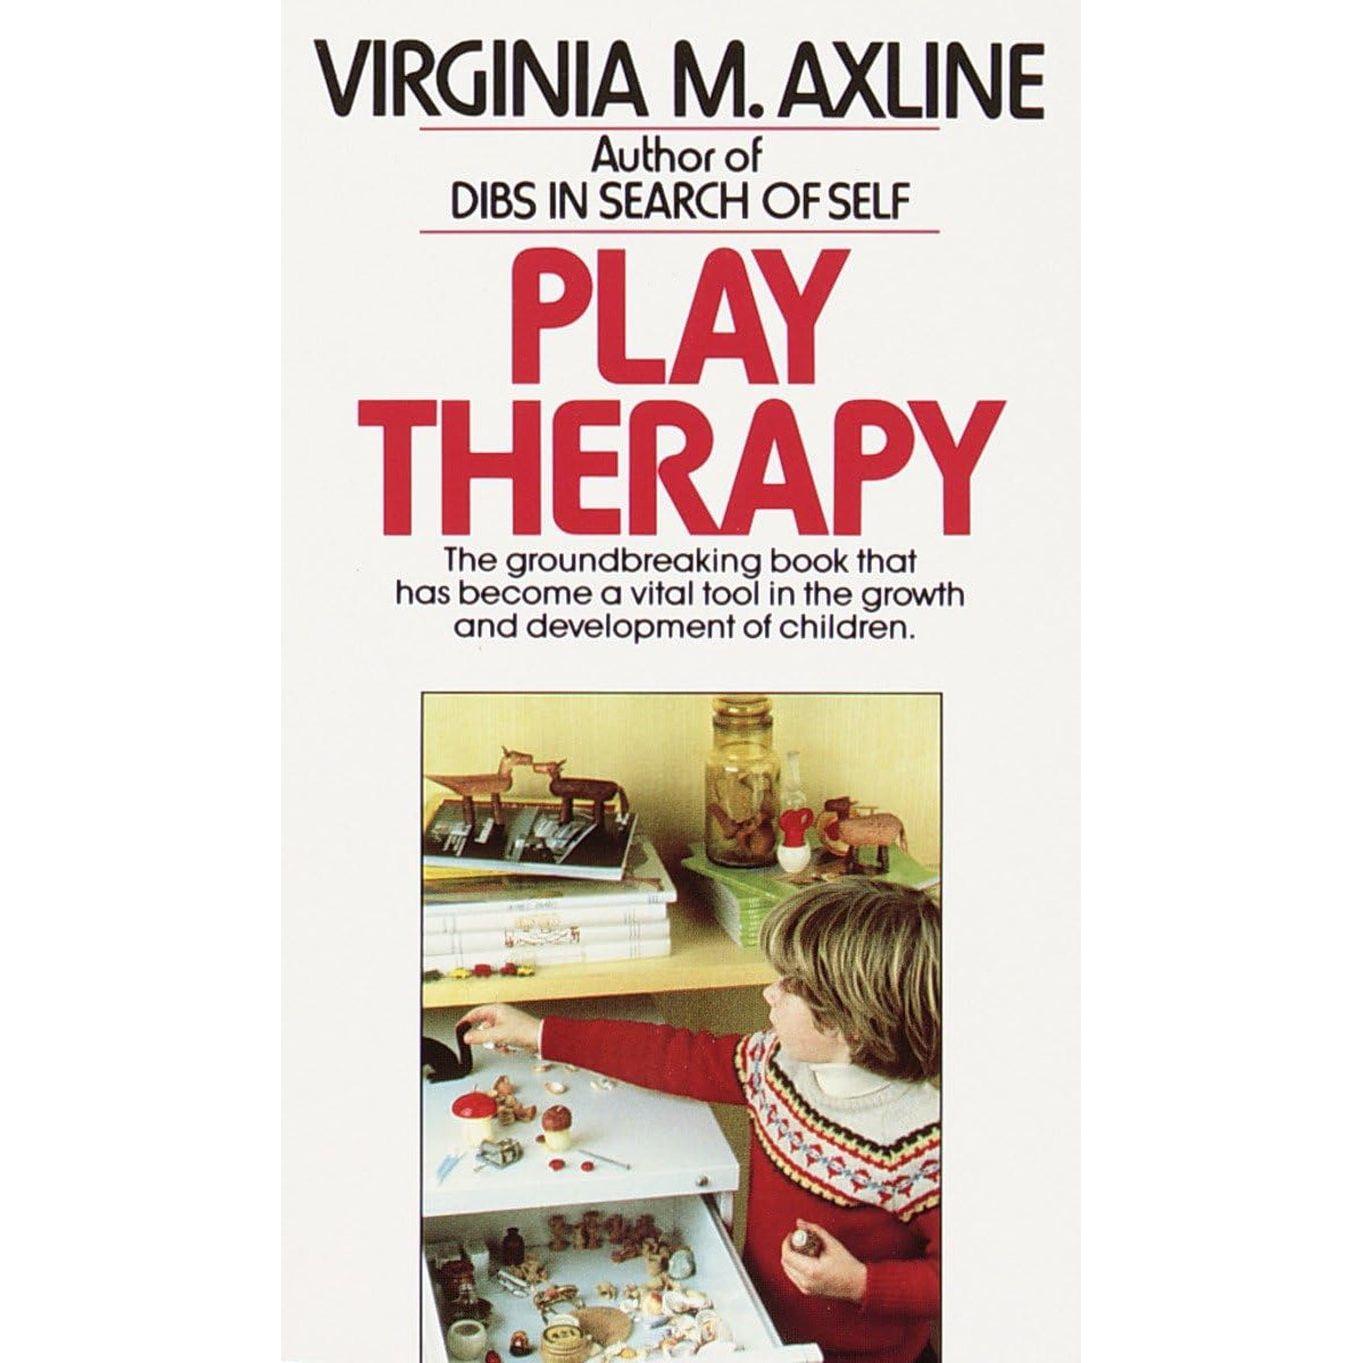 Play Therapy: the Groundbreaking Book That Has Become a Vital Tool in the Growth and Development of Children